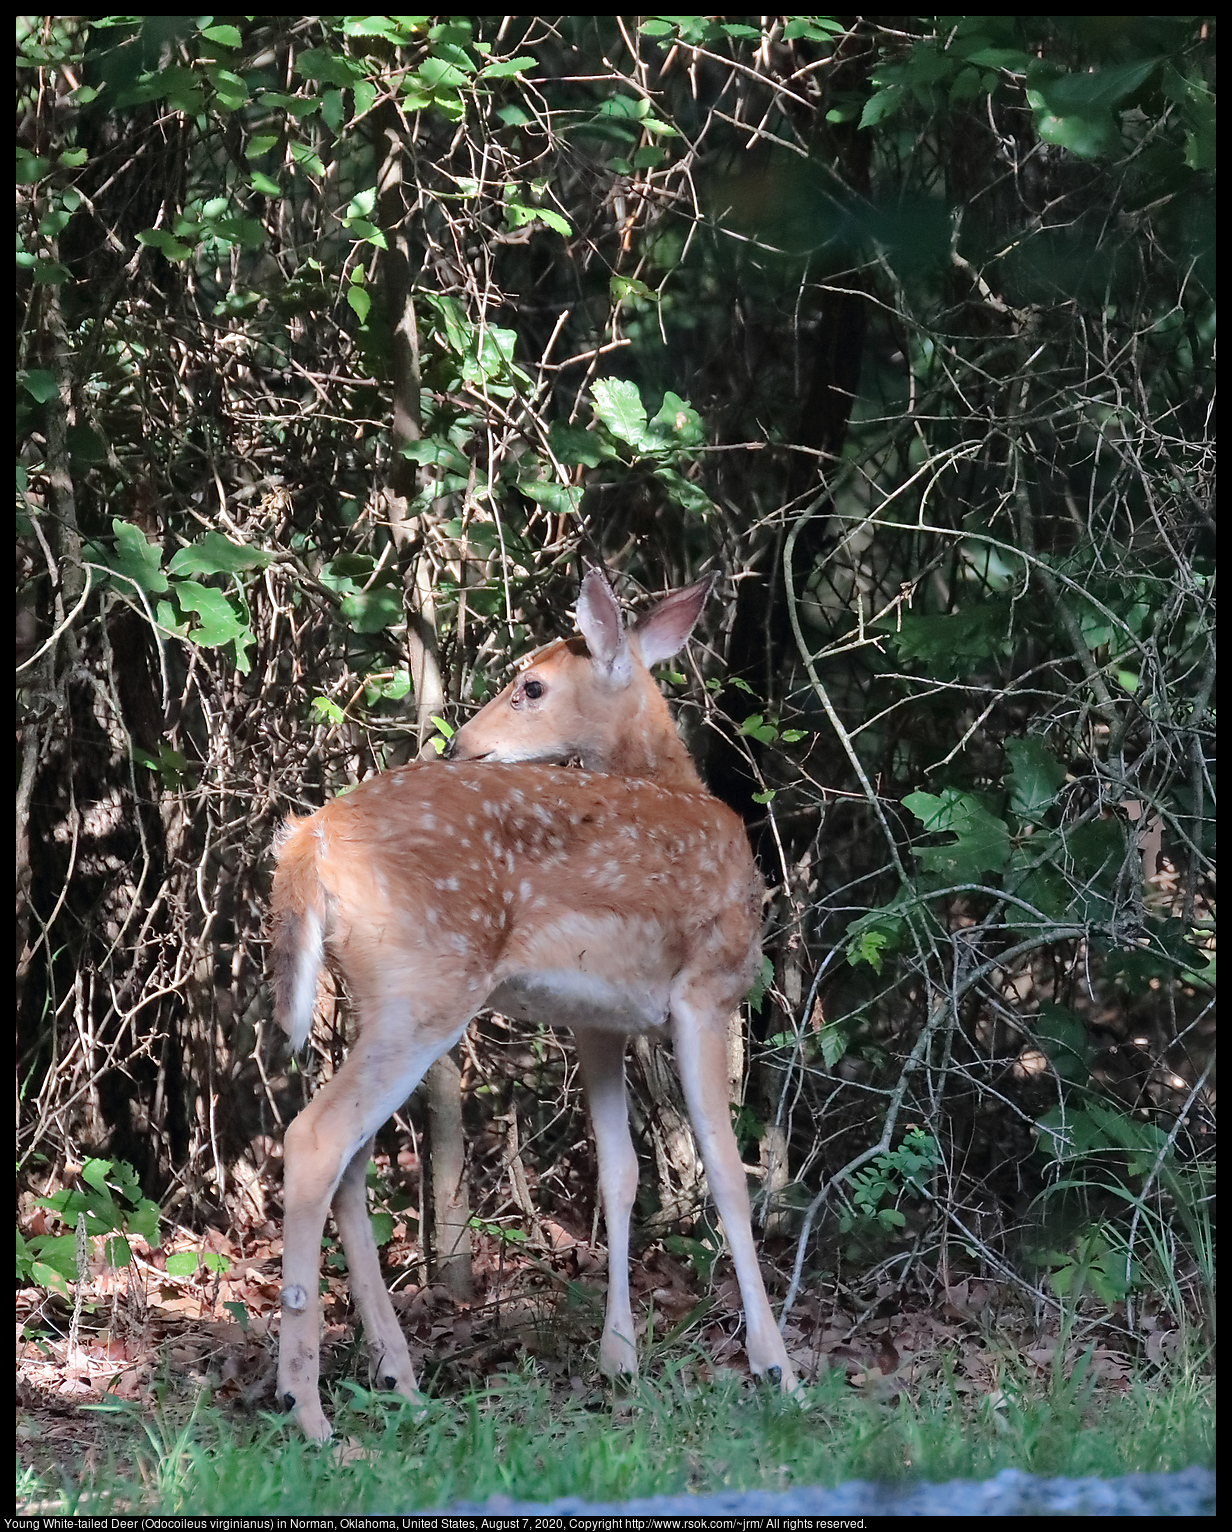 Young White-tailed Deer (Odocoileus virginianus) in Norman, Oklahoma, United States, August 7, 2020